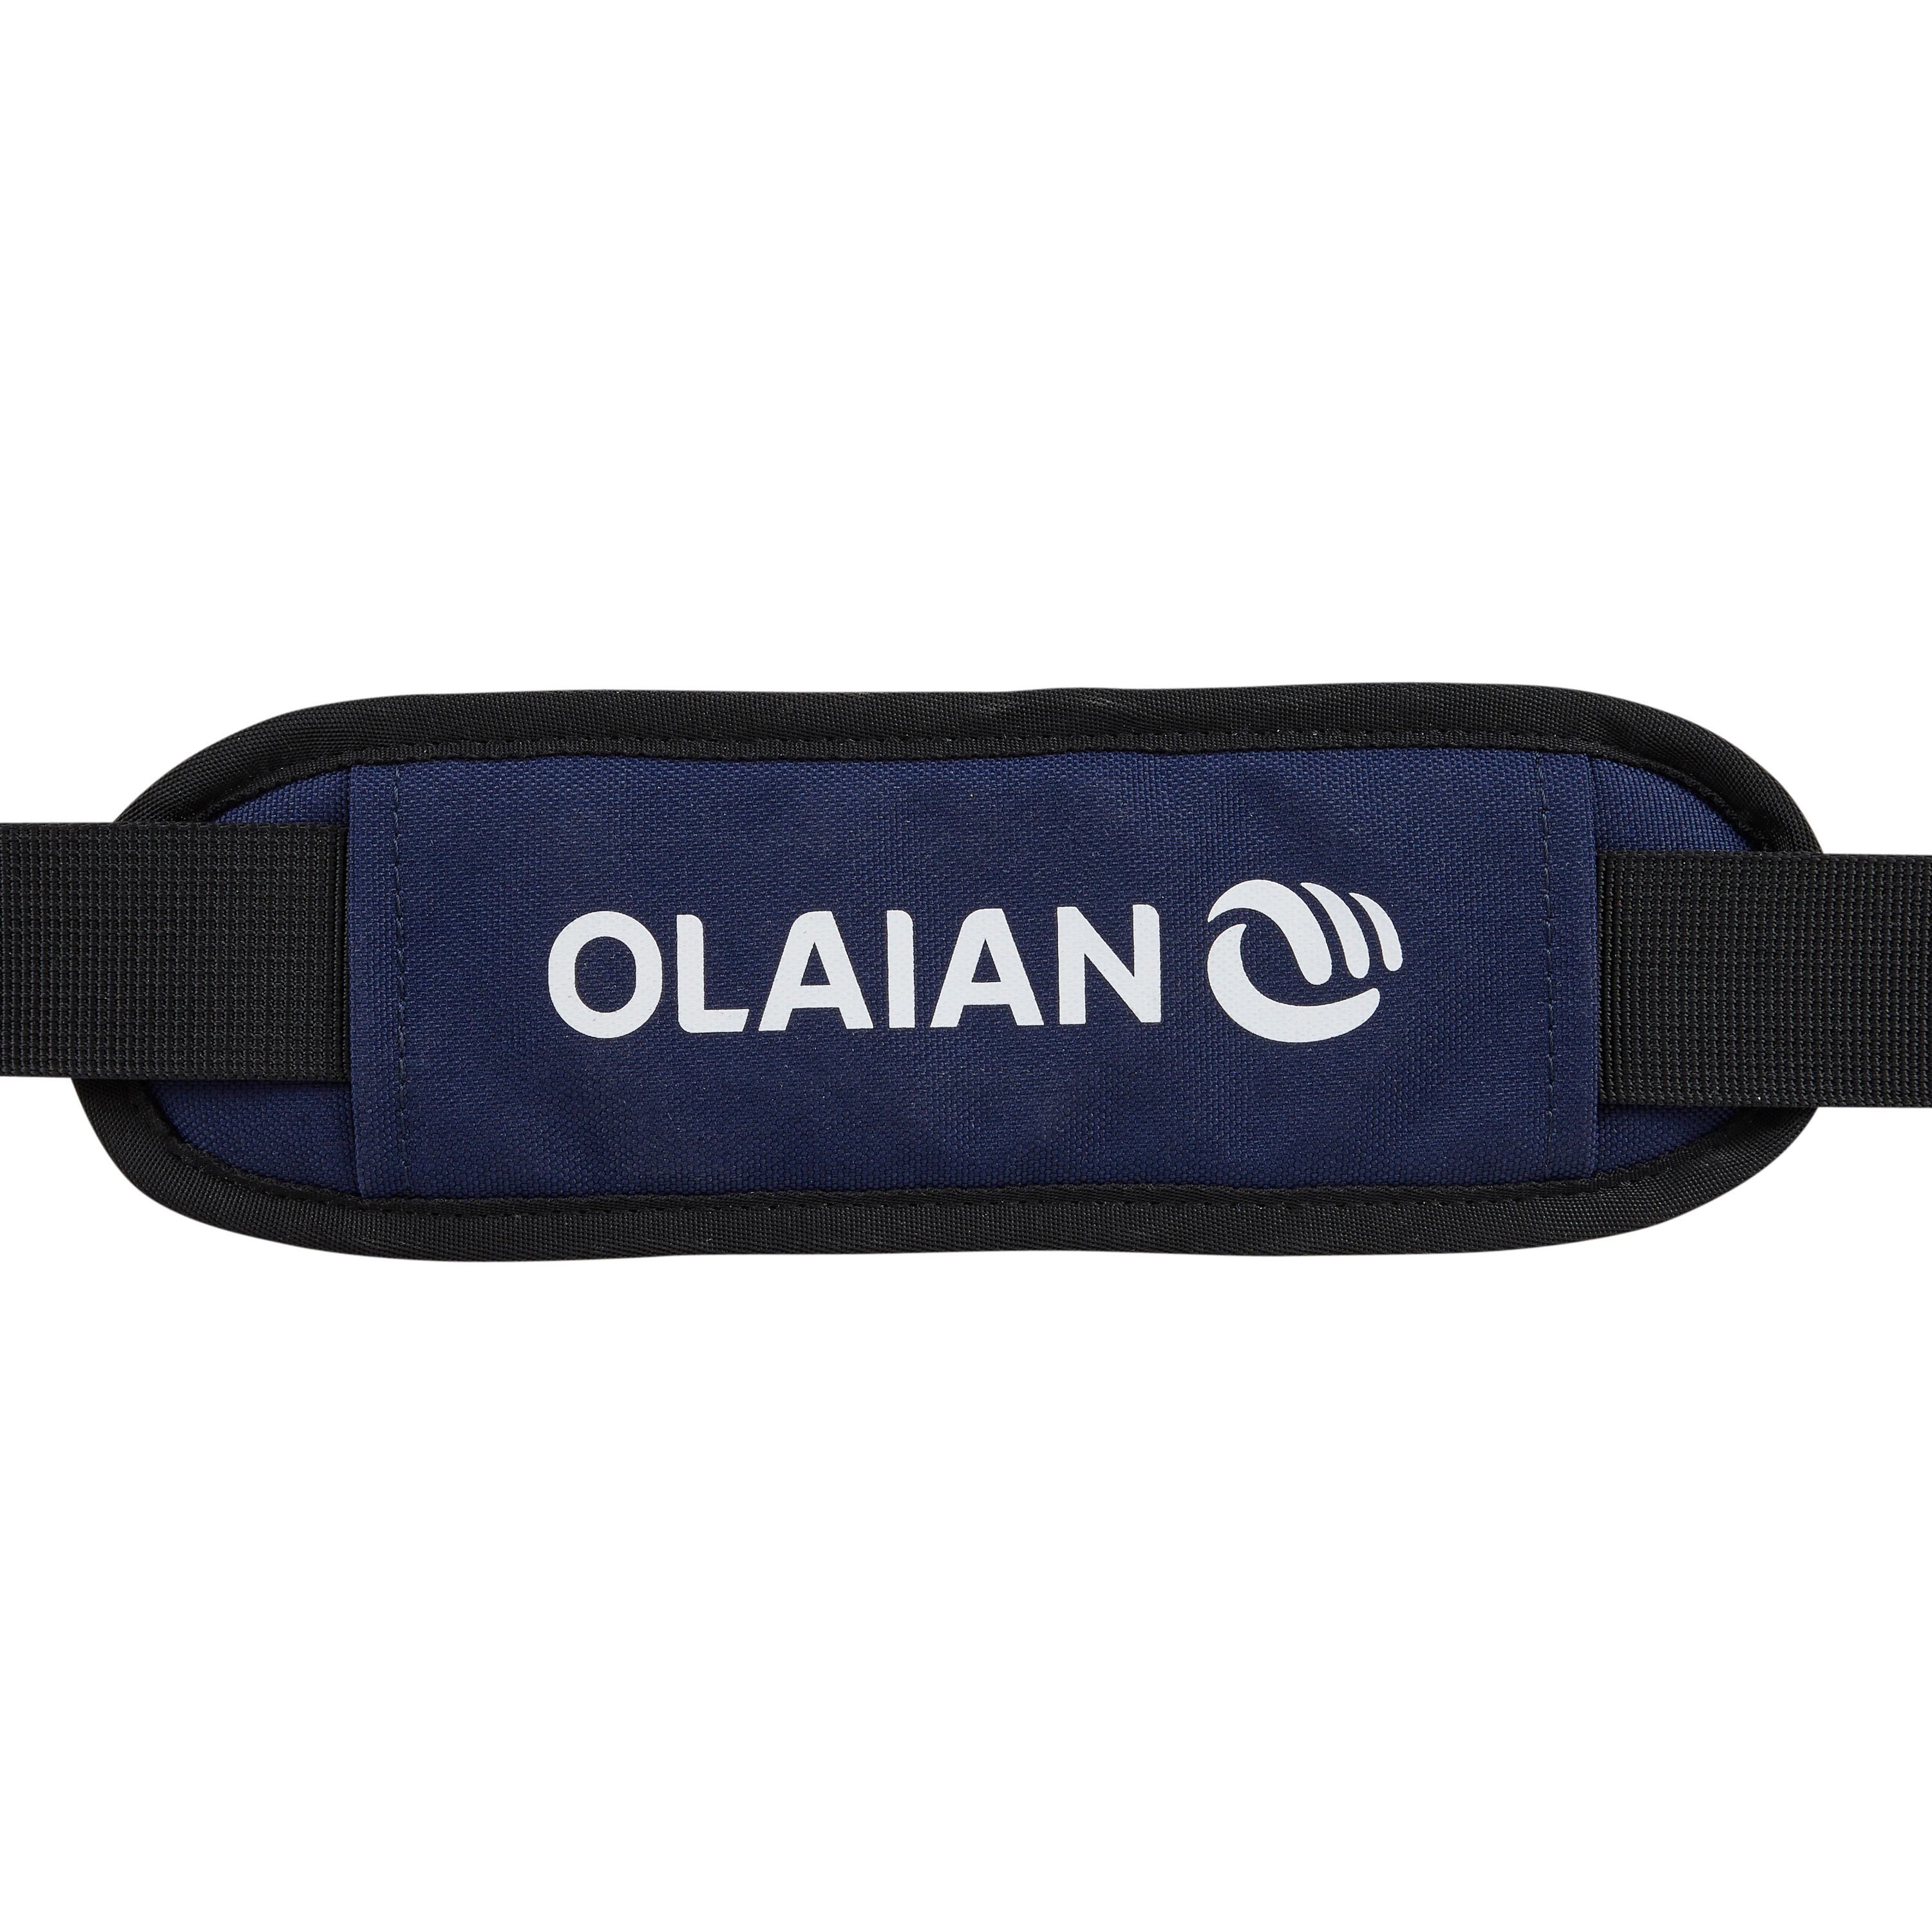 ADJUSTABLE COVER for boards 7'3 to 9'4 (221 to 285 cm) - OLAIAN